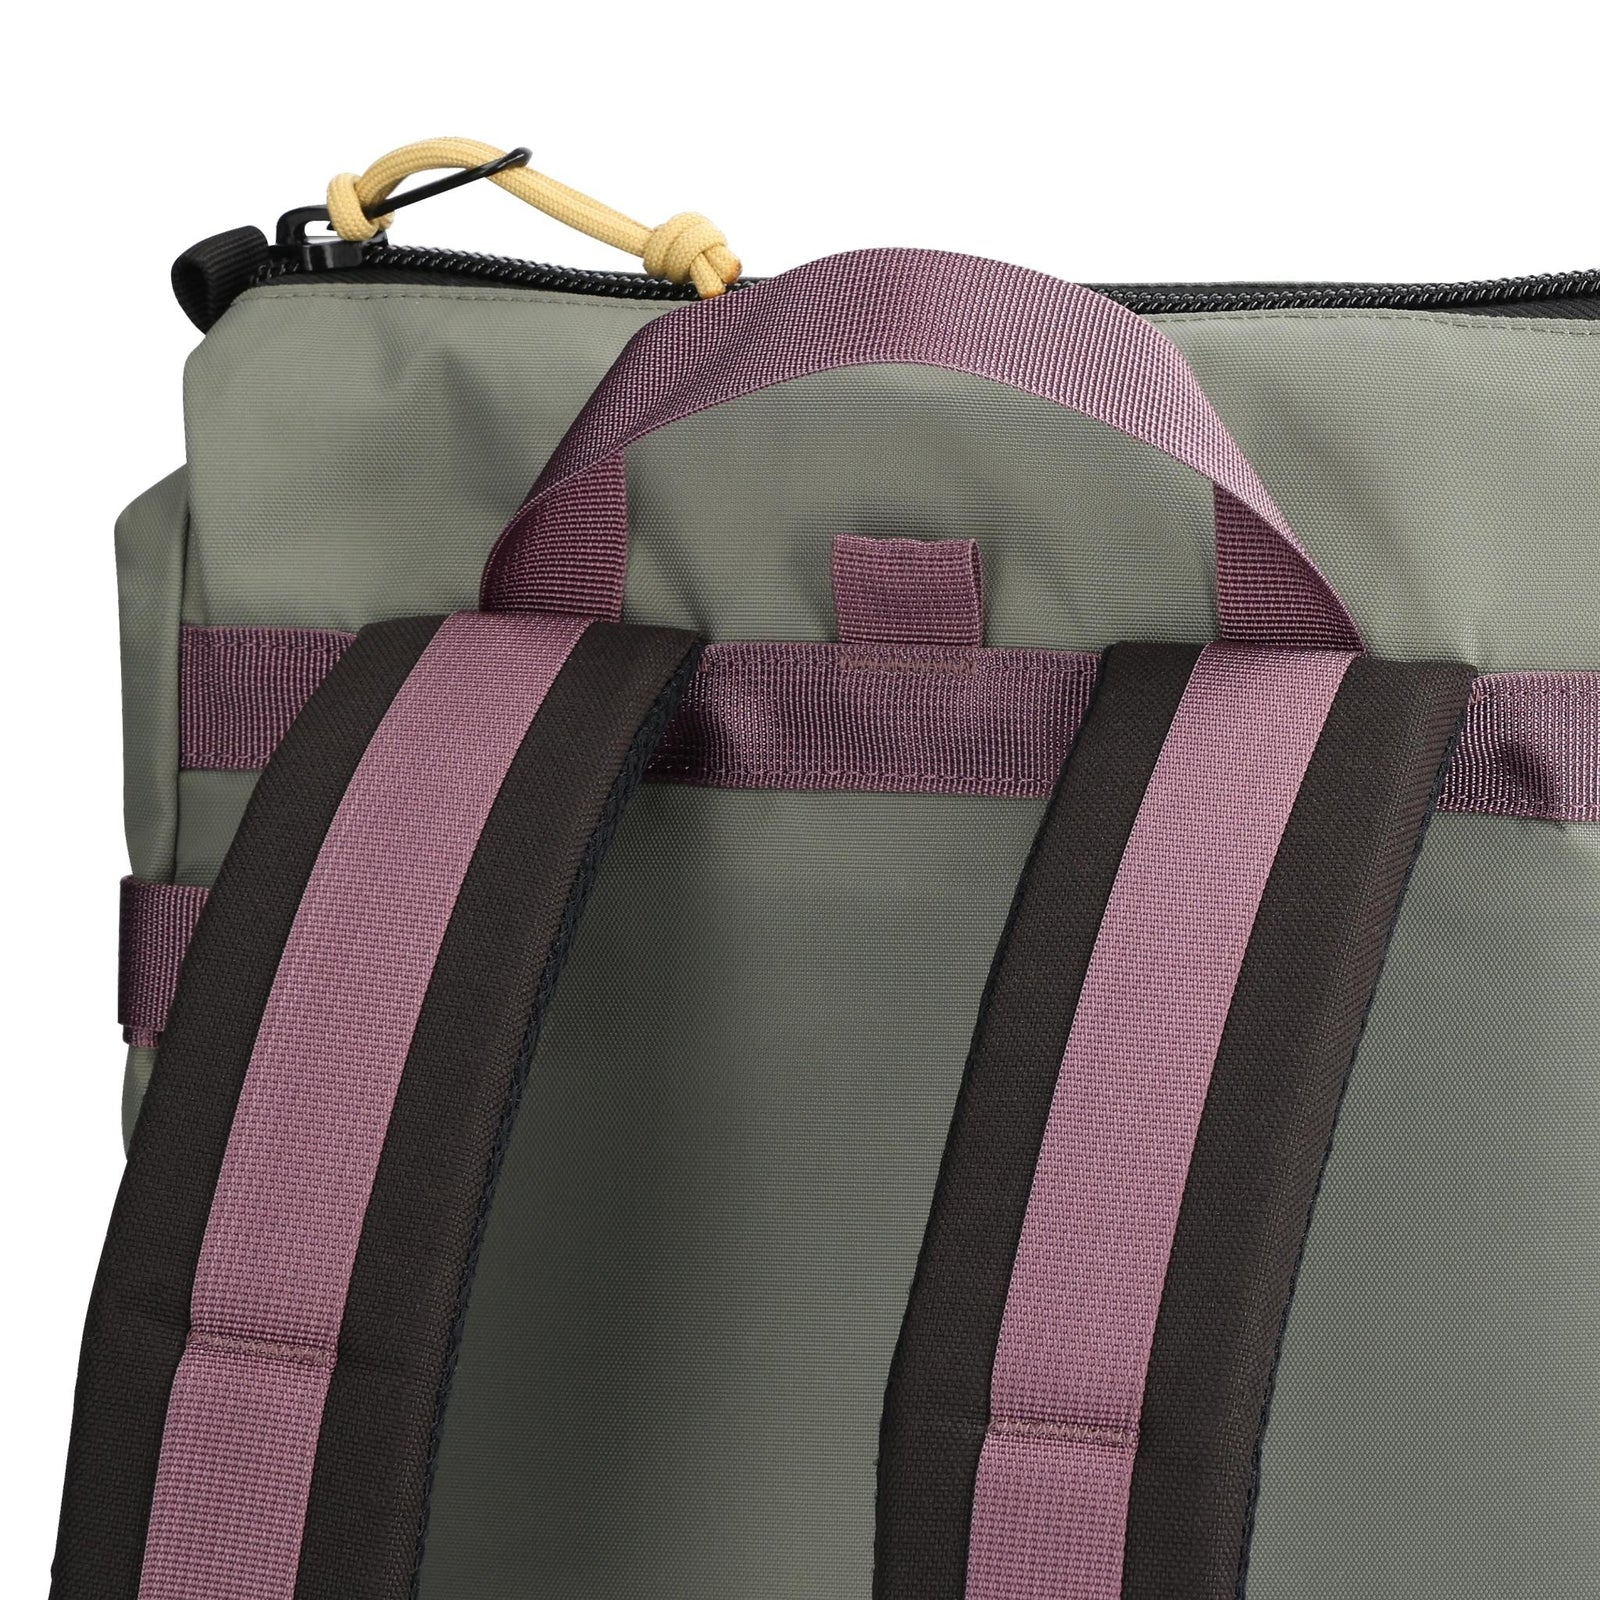 Detail shot of Topo Designs Rover Pack Classic in "Beetle / Spice"